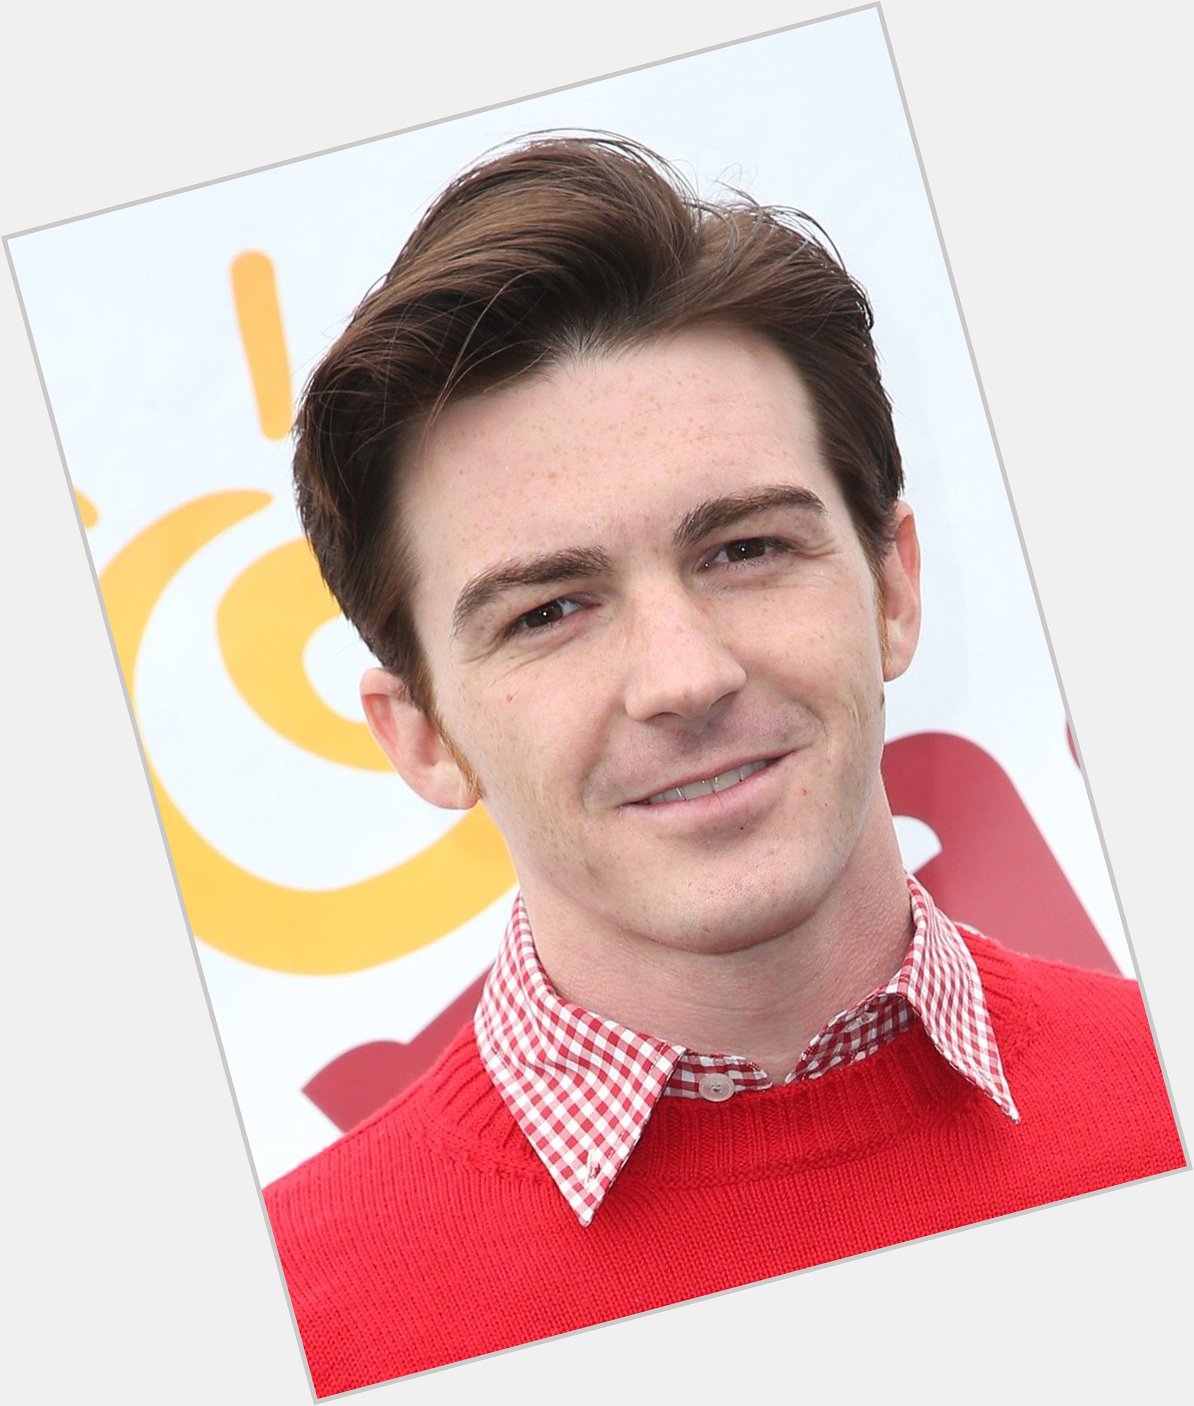 Happy 36th birthday to (Drake Bell)! The actor who played Drake Parker from Drake & Josh. 